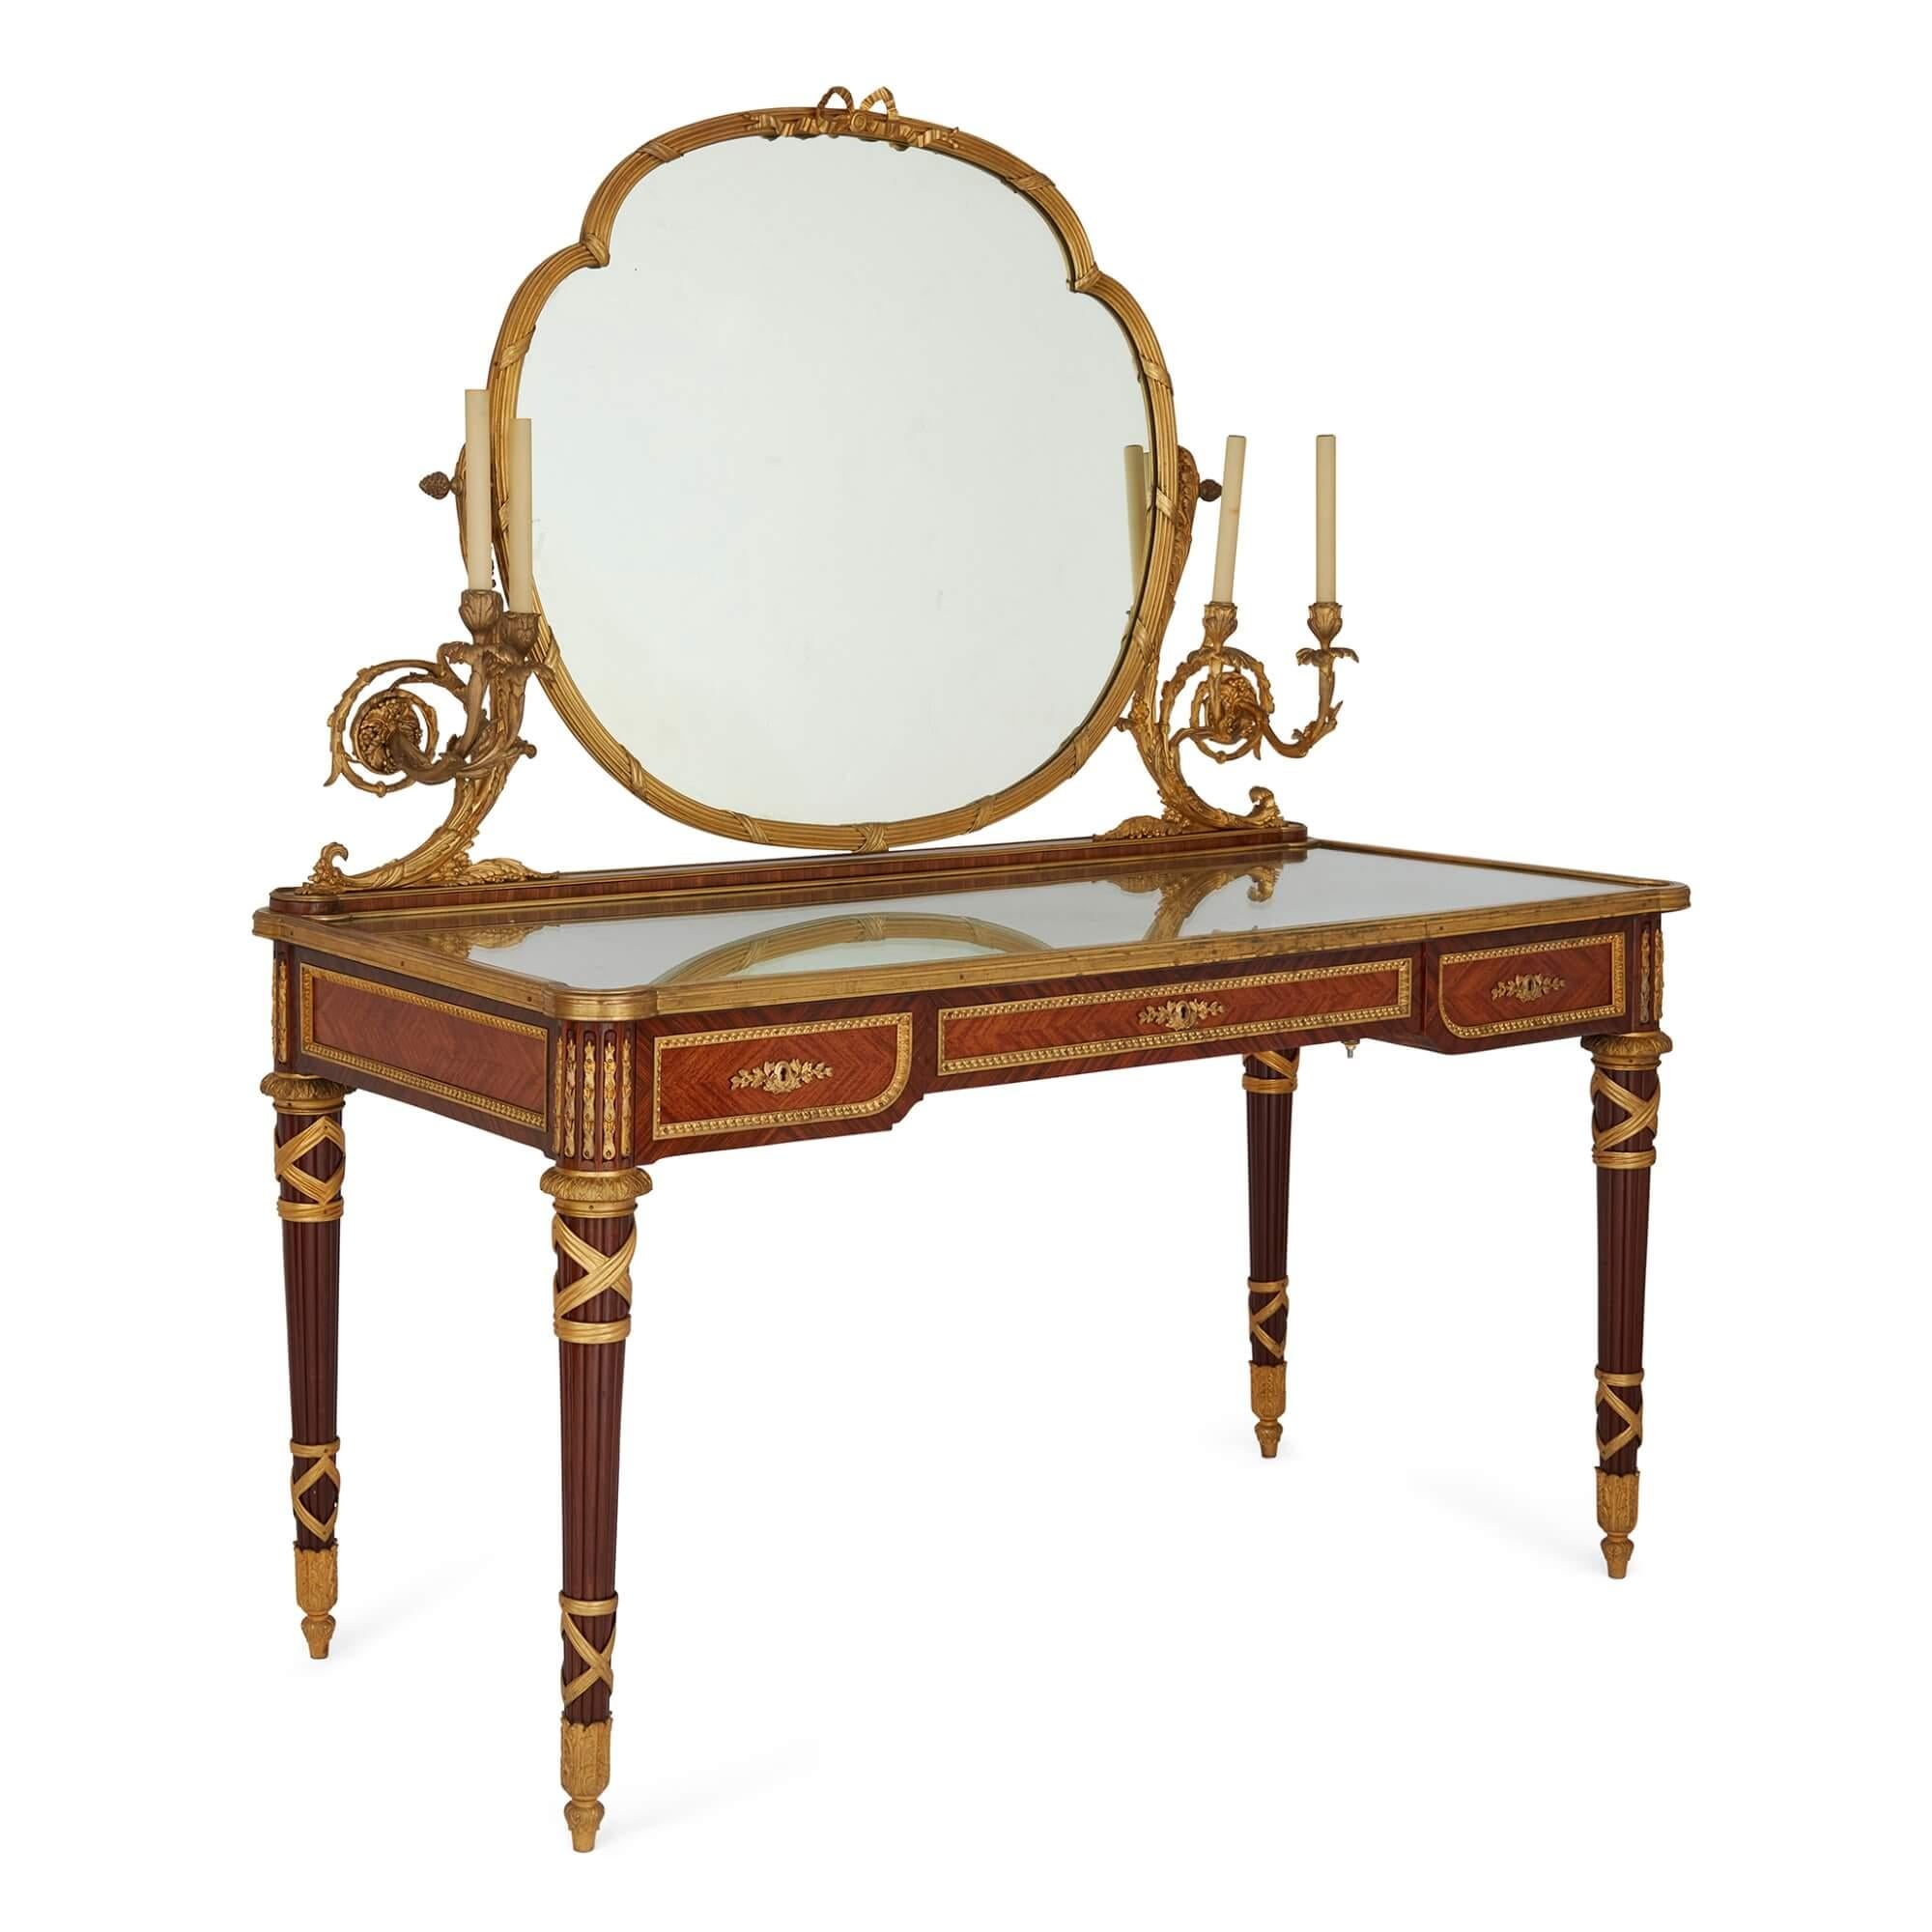 Antique ormolu mounted dressing table by Zwiener Jansen Successeur 
French, c. 1900 
Height 153cm, width 134cm, depth 63cm 

Superbly crafted by the renowned French firm Zwiener Jansen Successeur, the dressing table is adorned with unusual features